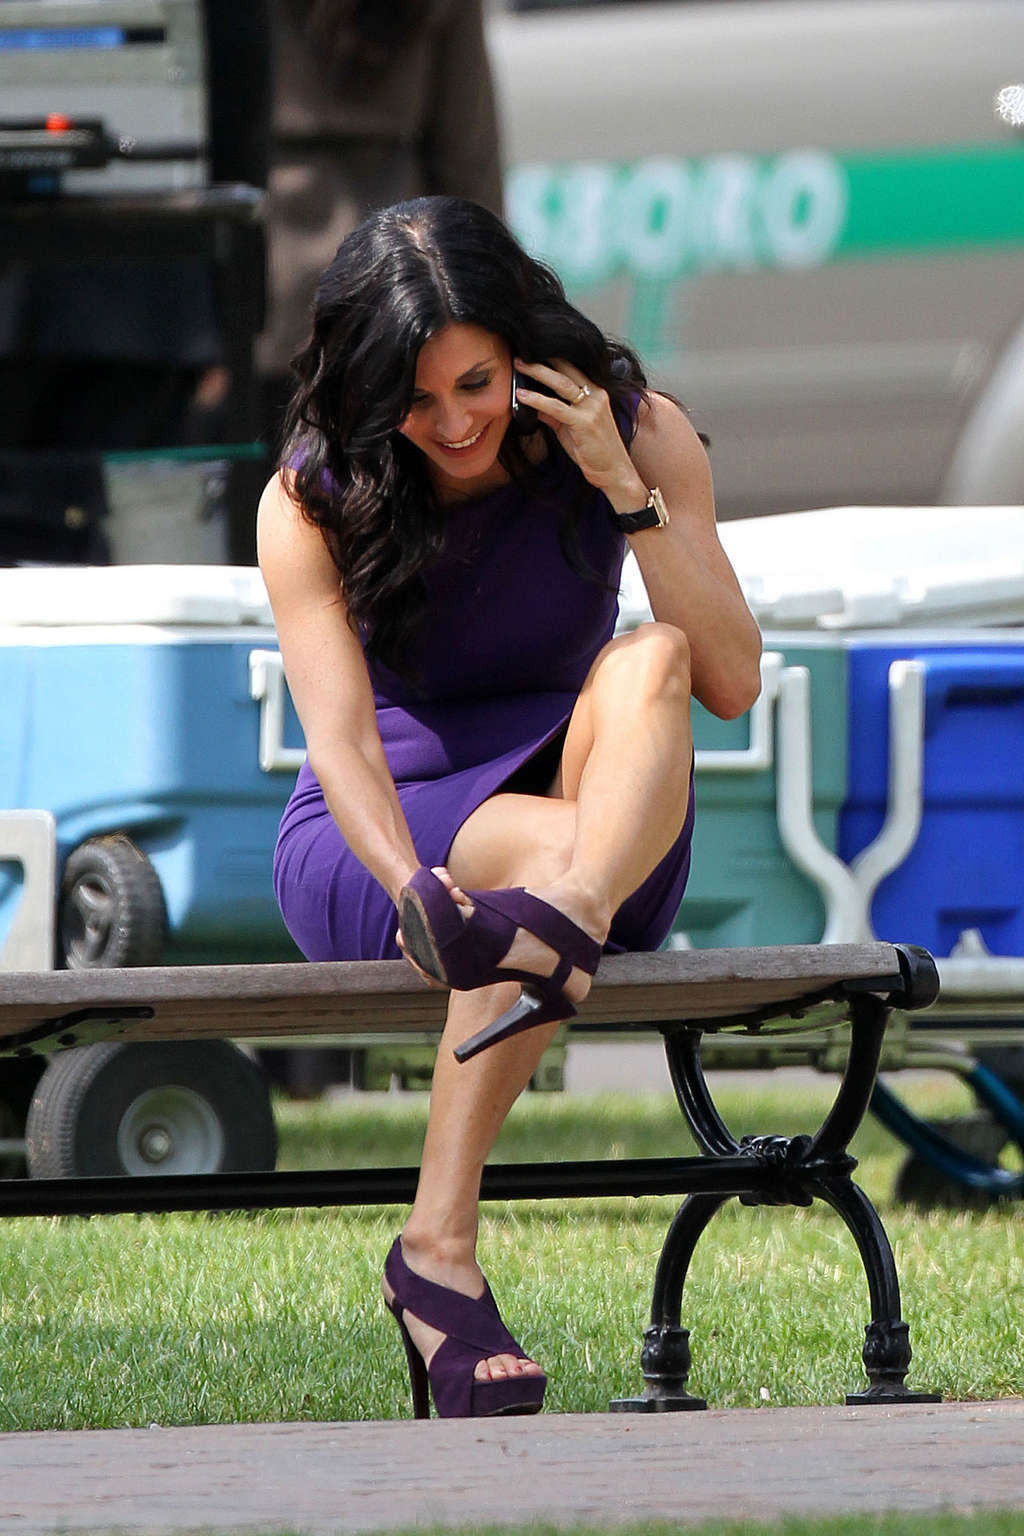 Courteney Cox flashing her panties and show great body in tight dress #75339415